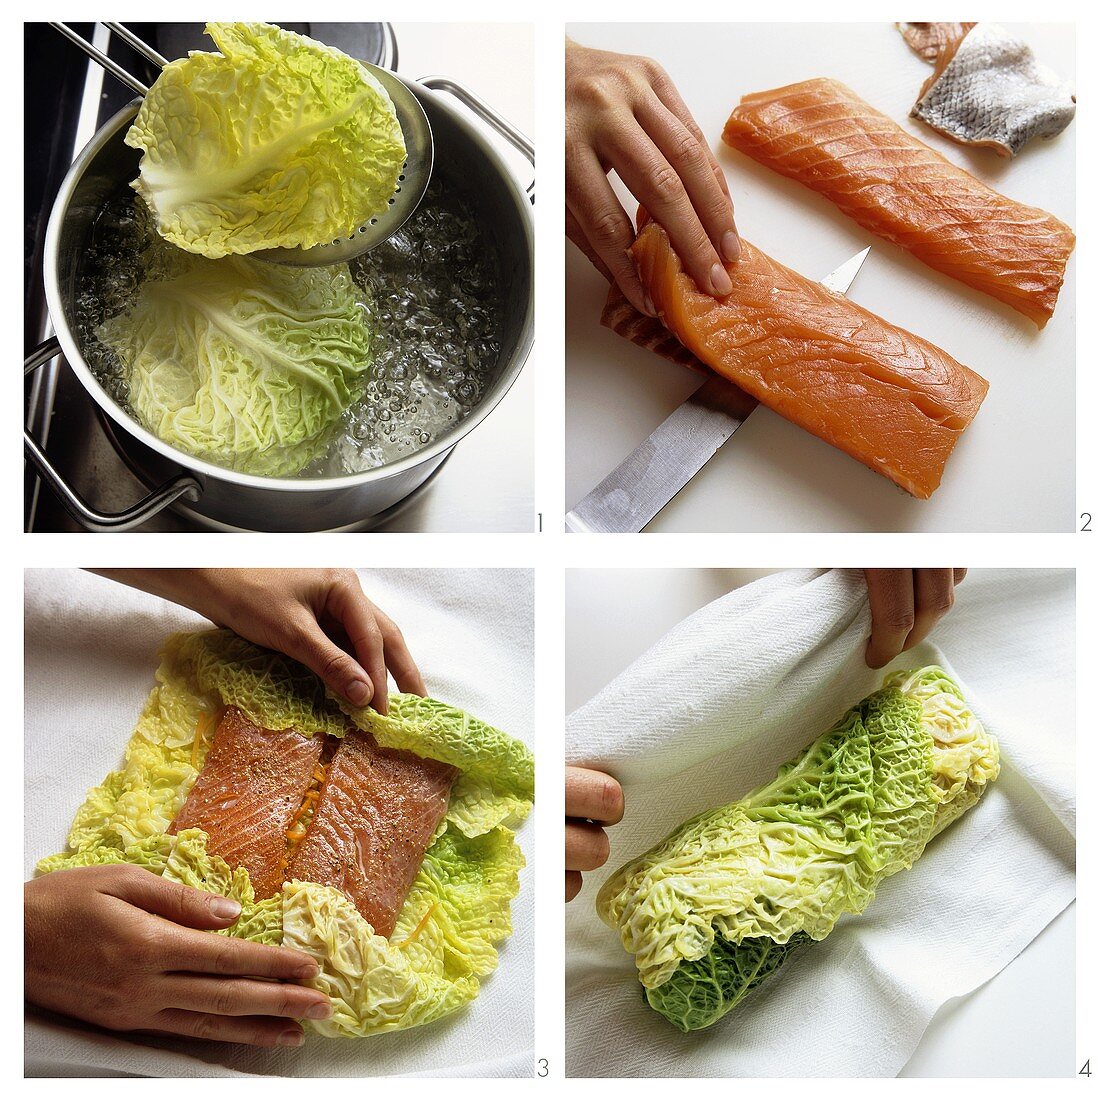 Preparing salmon fillet wrapped in savoy cabbage leaves